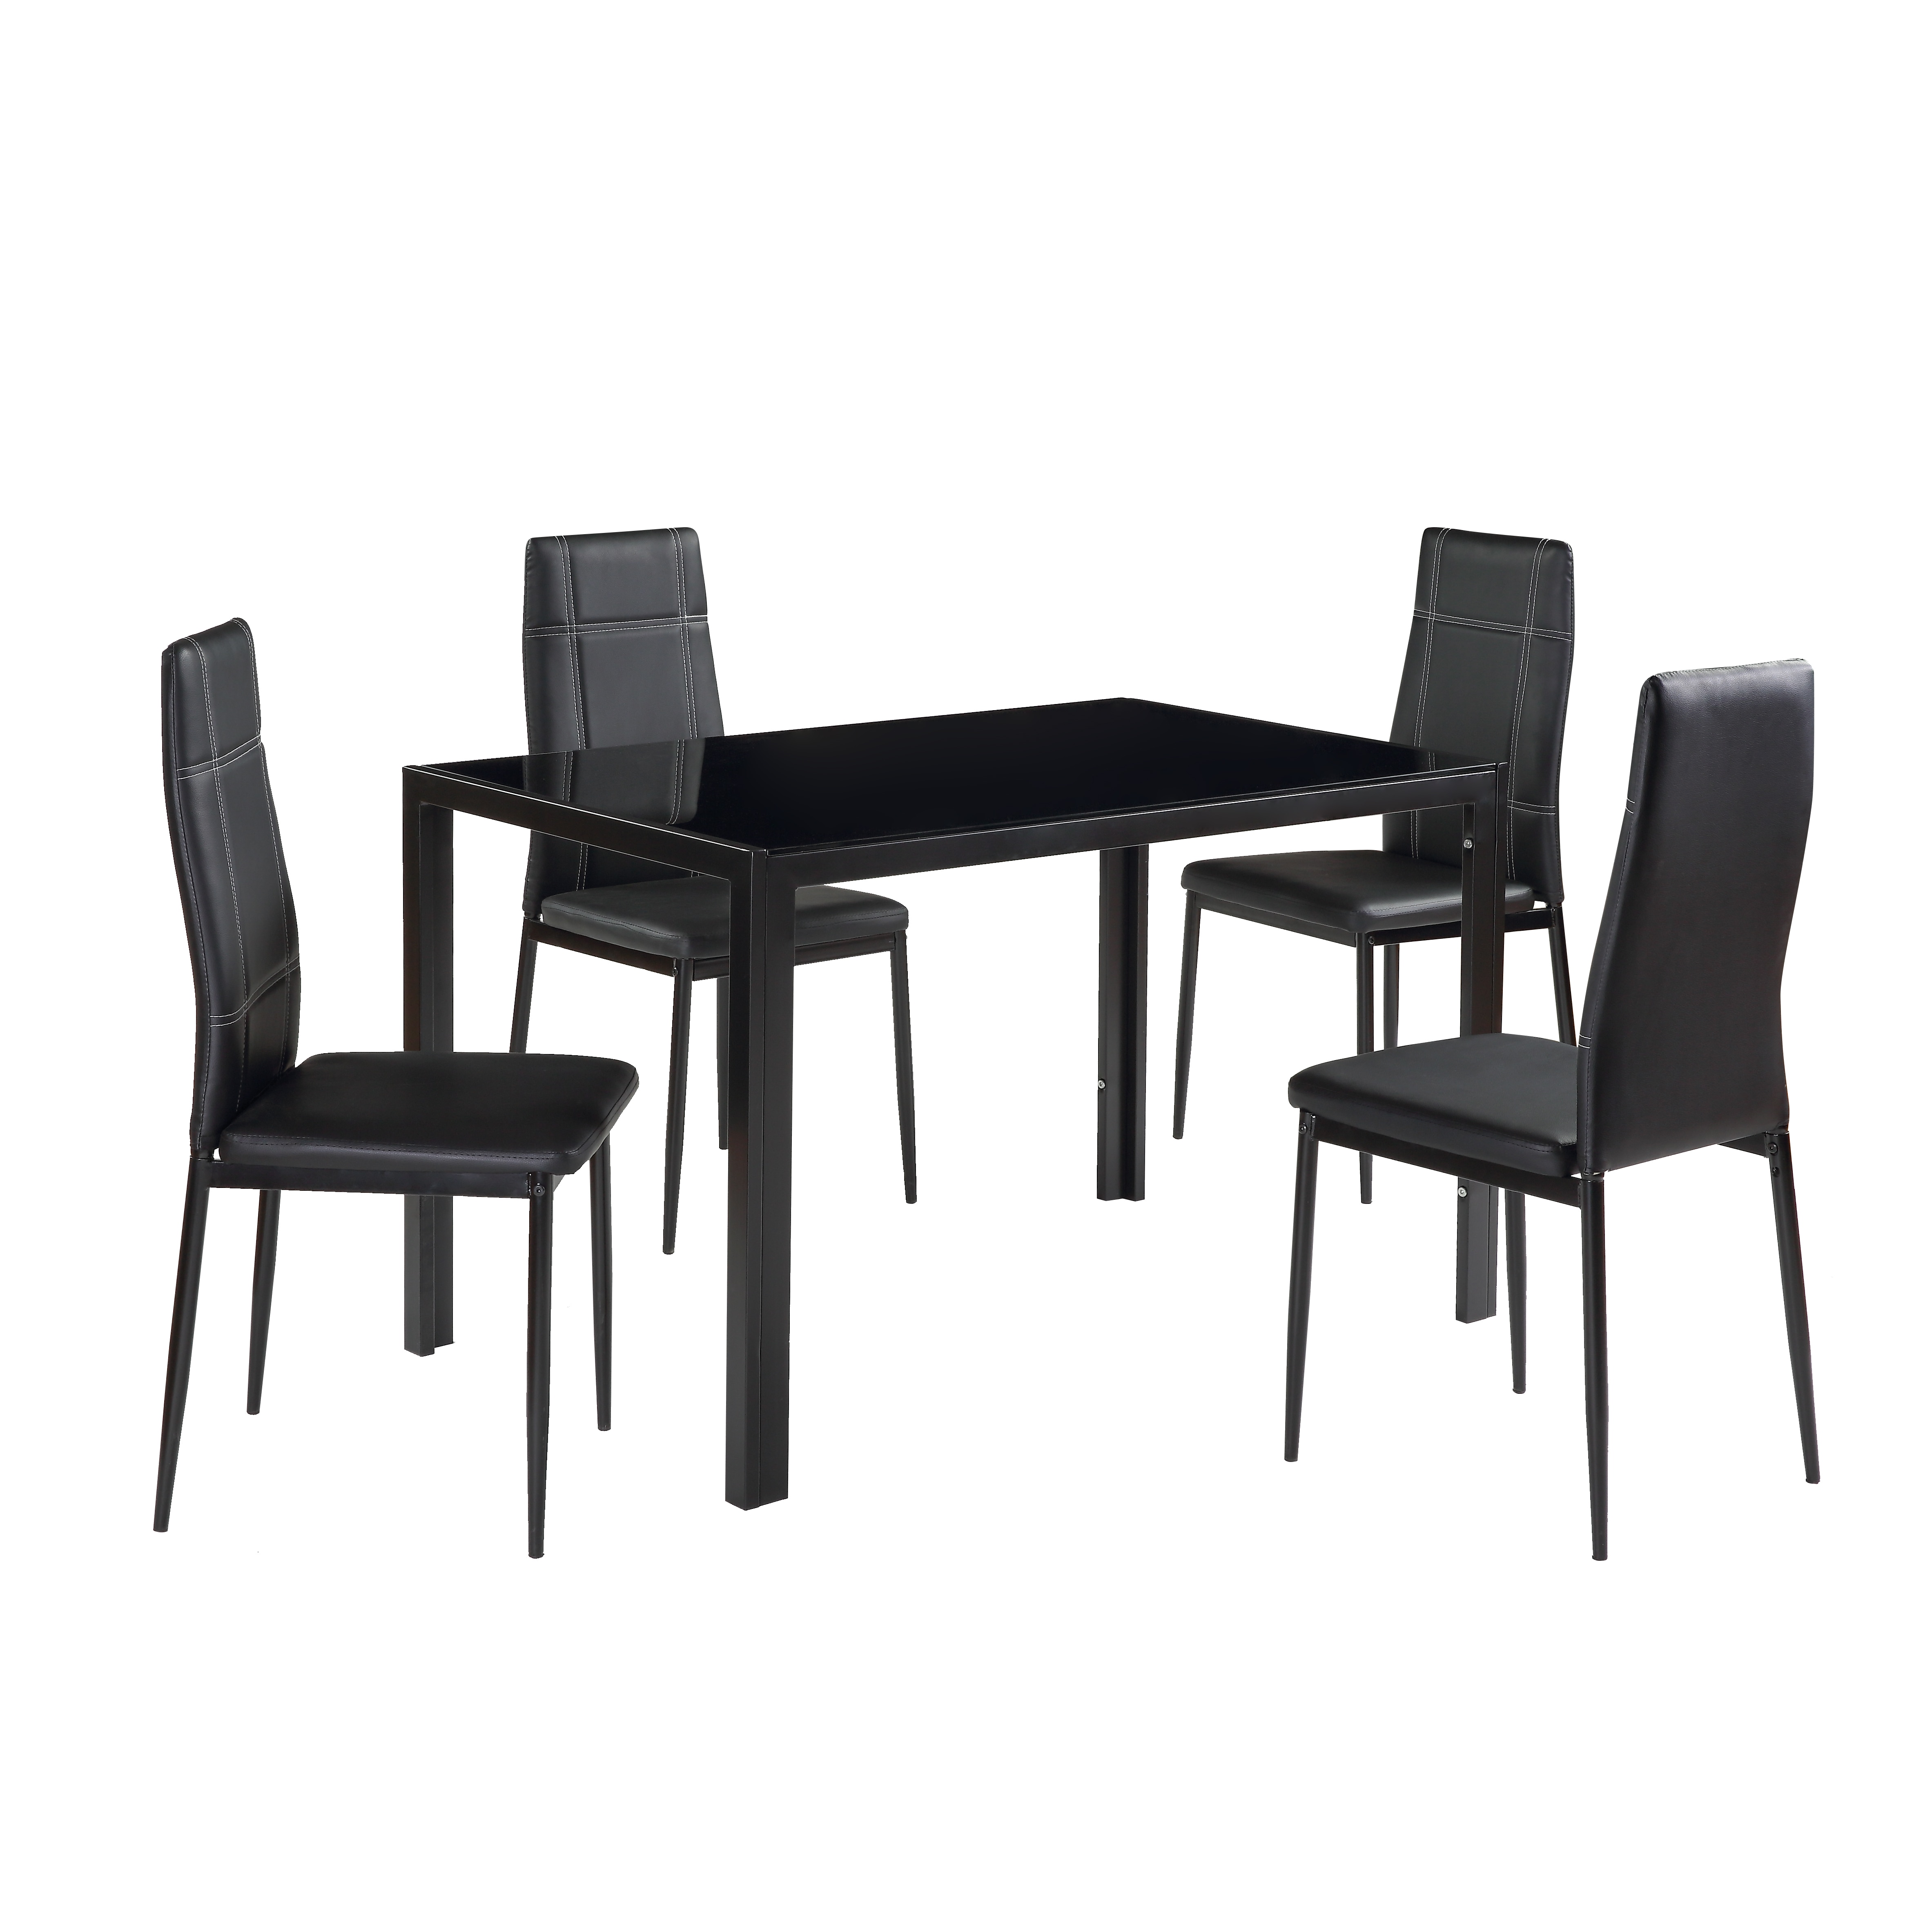 Dining Table Set 5 Piece Tempered Glass Table and 4pcs Faux Leather Dinning Chairs US Warehouse